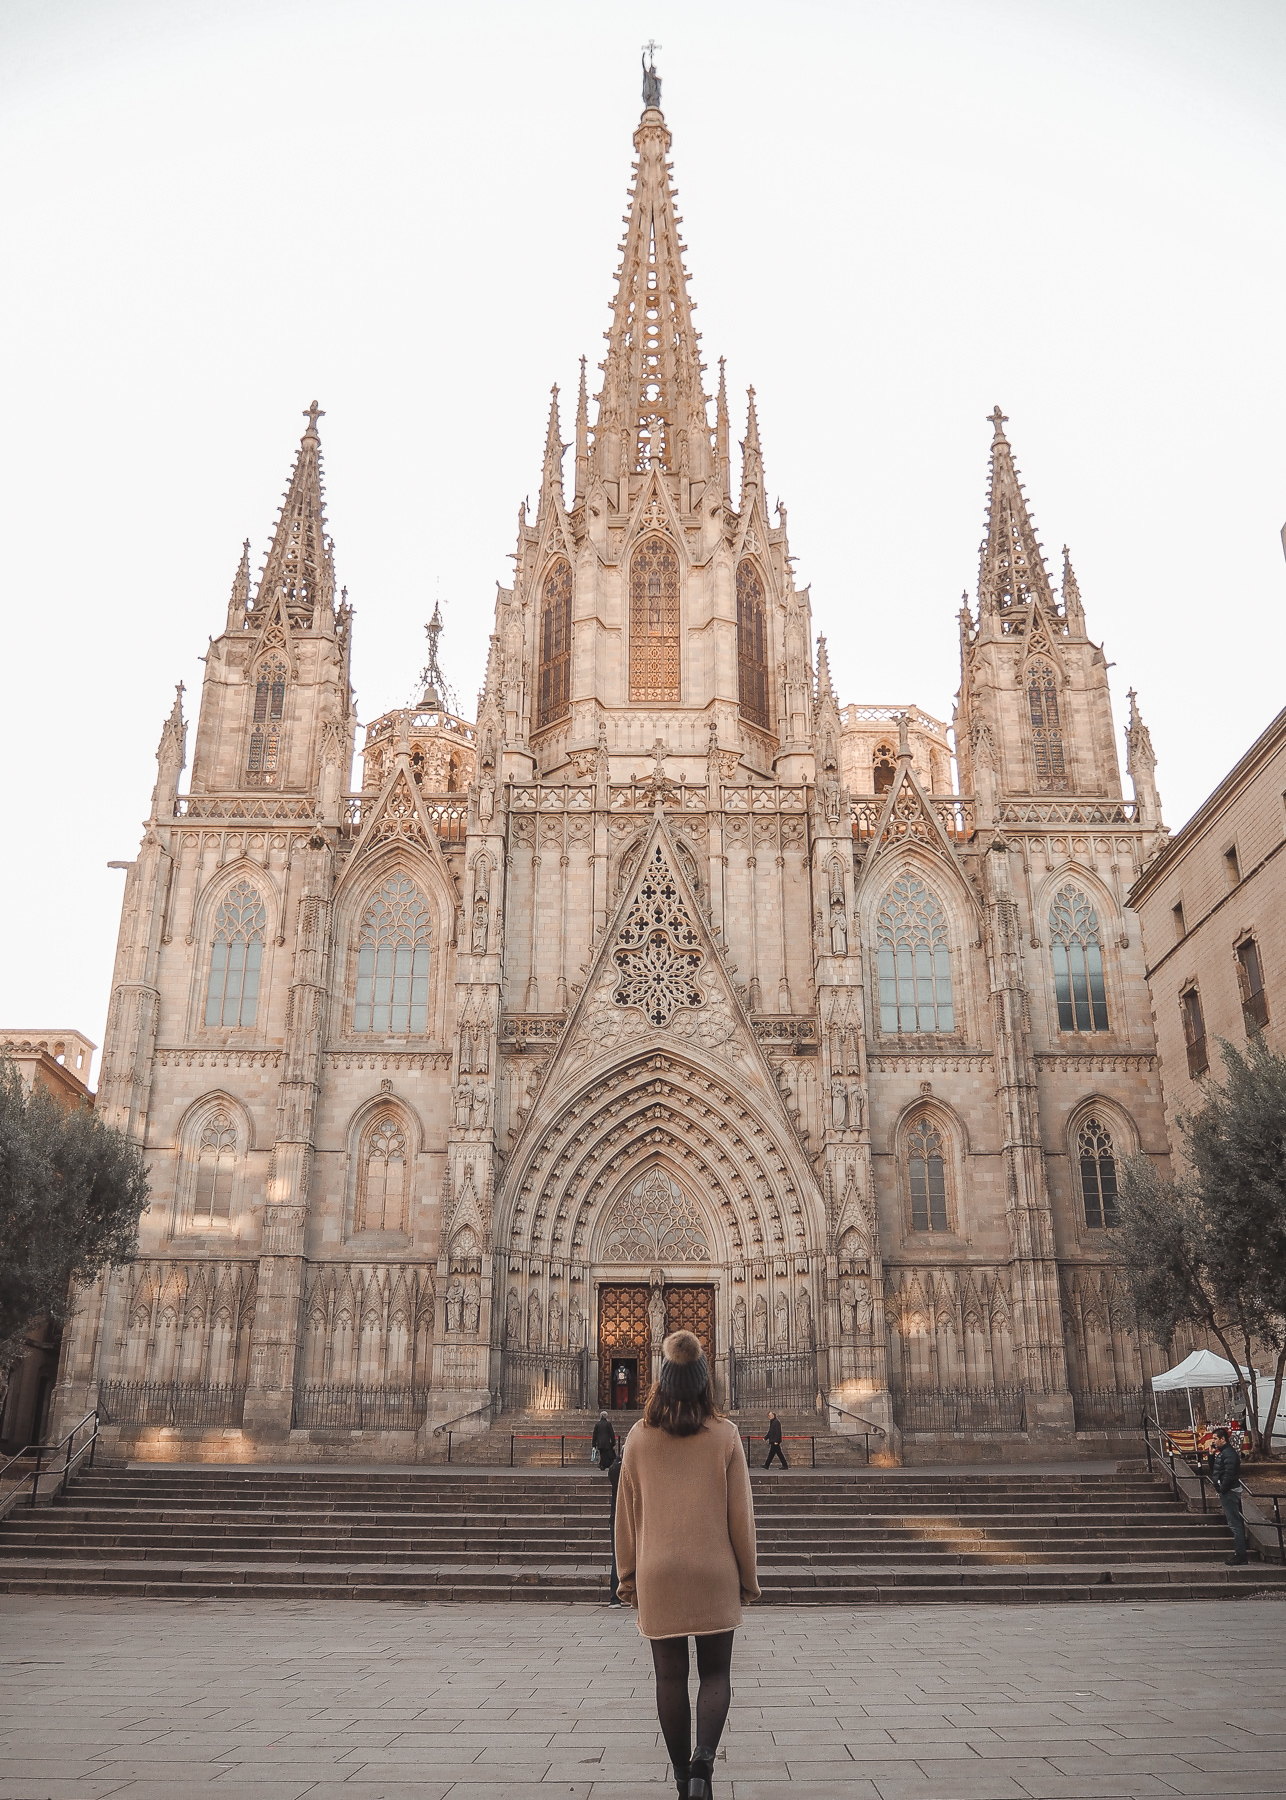 The Most Instagrammable Spots In Barcelona | lifestyletraveler.co | IG: @lifestyletraveler.co